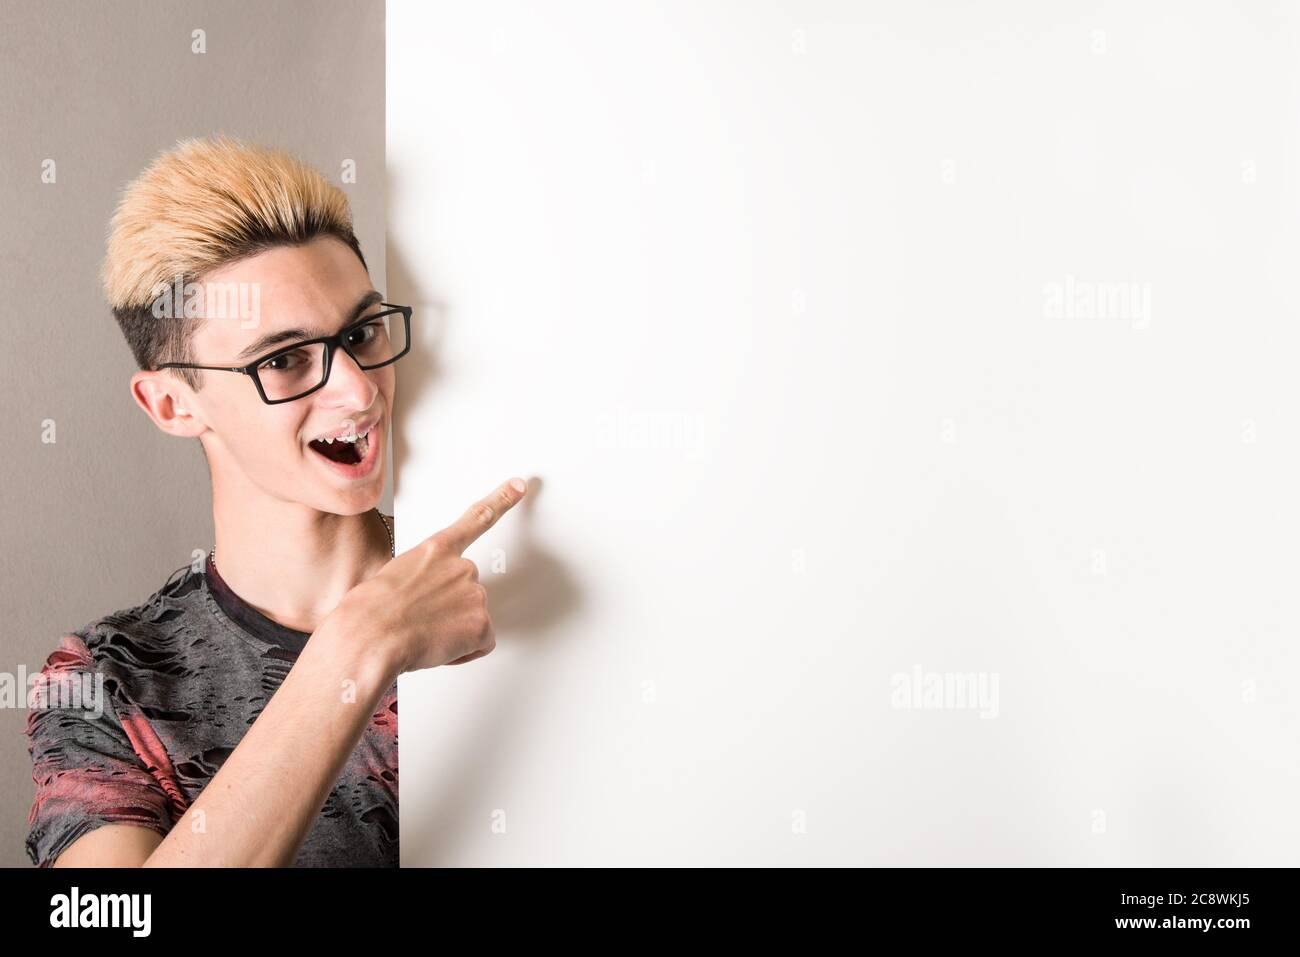 Young boy pointing to a white panel Stock Photo